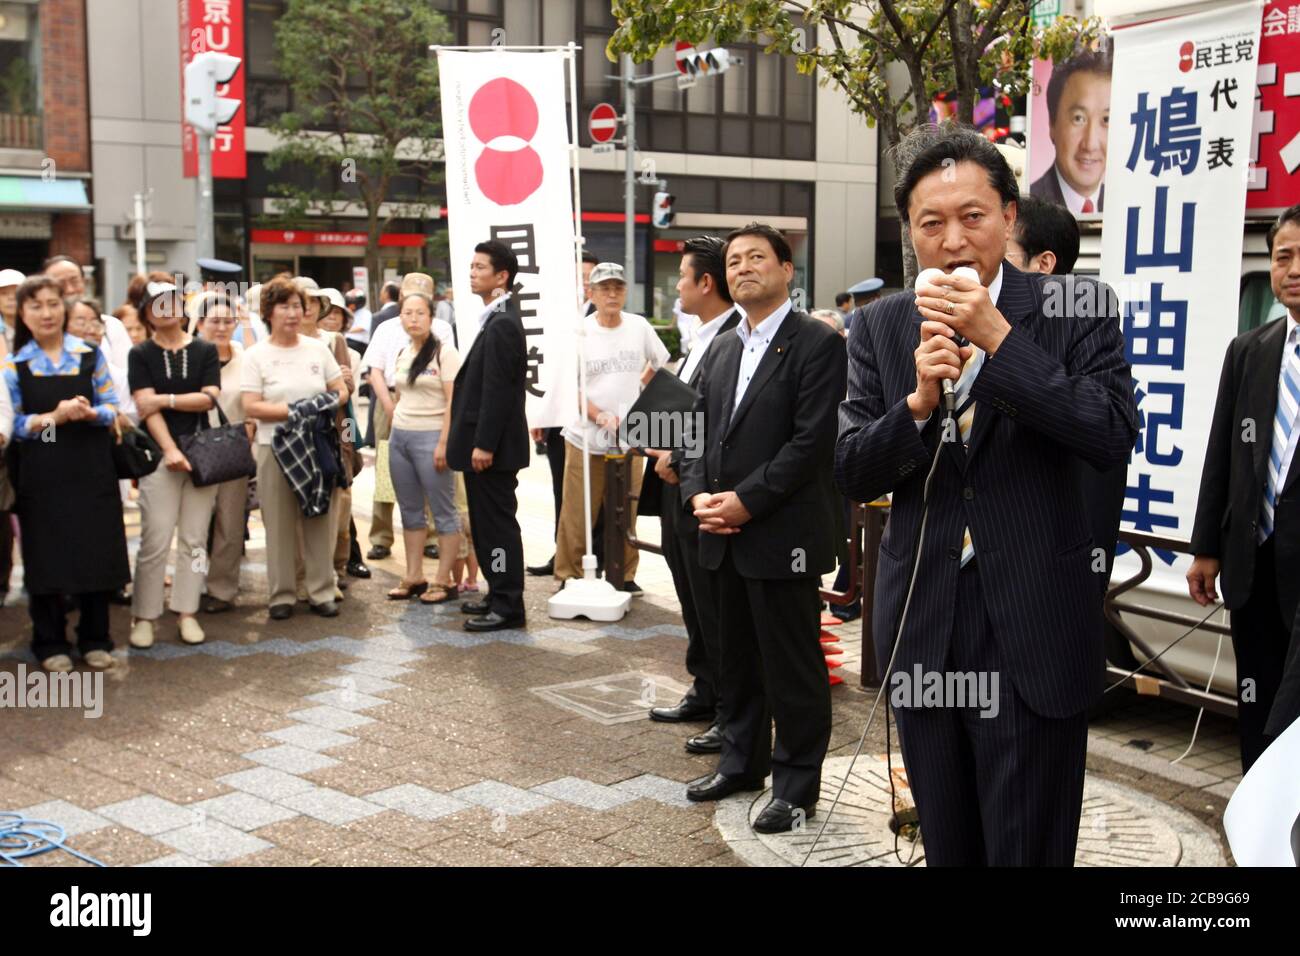 Yukio Hatoyama seen during a speech in the streets of Tokyo. Yukio Hatoyama, the leader of the Democratic Party of Japan performed a street oratory to 'take the seat of the first party from the Liberal Democratic Party in Tokyo congressist election' at the Edogawa-ku, Tokyo Koiwa station square. Stock Photo